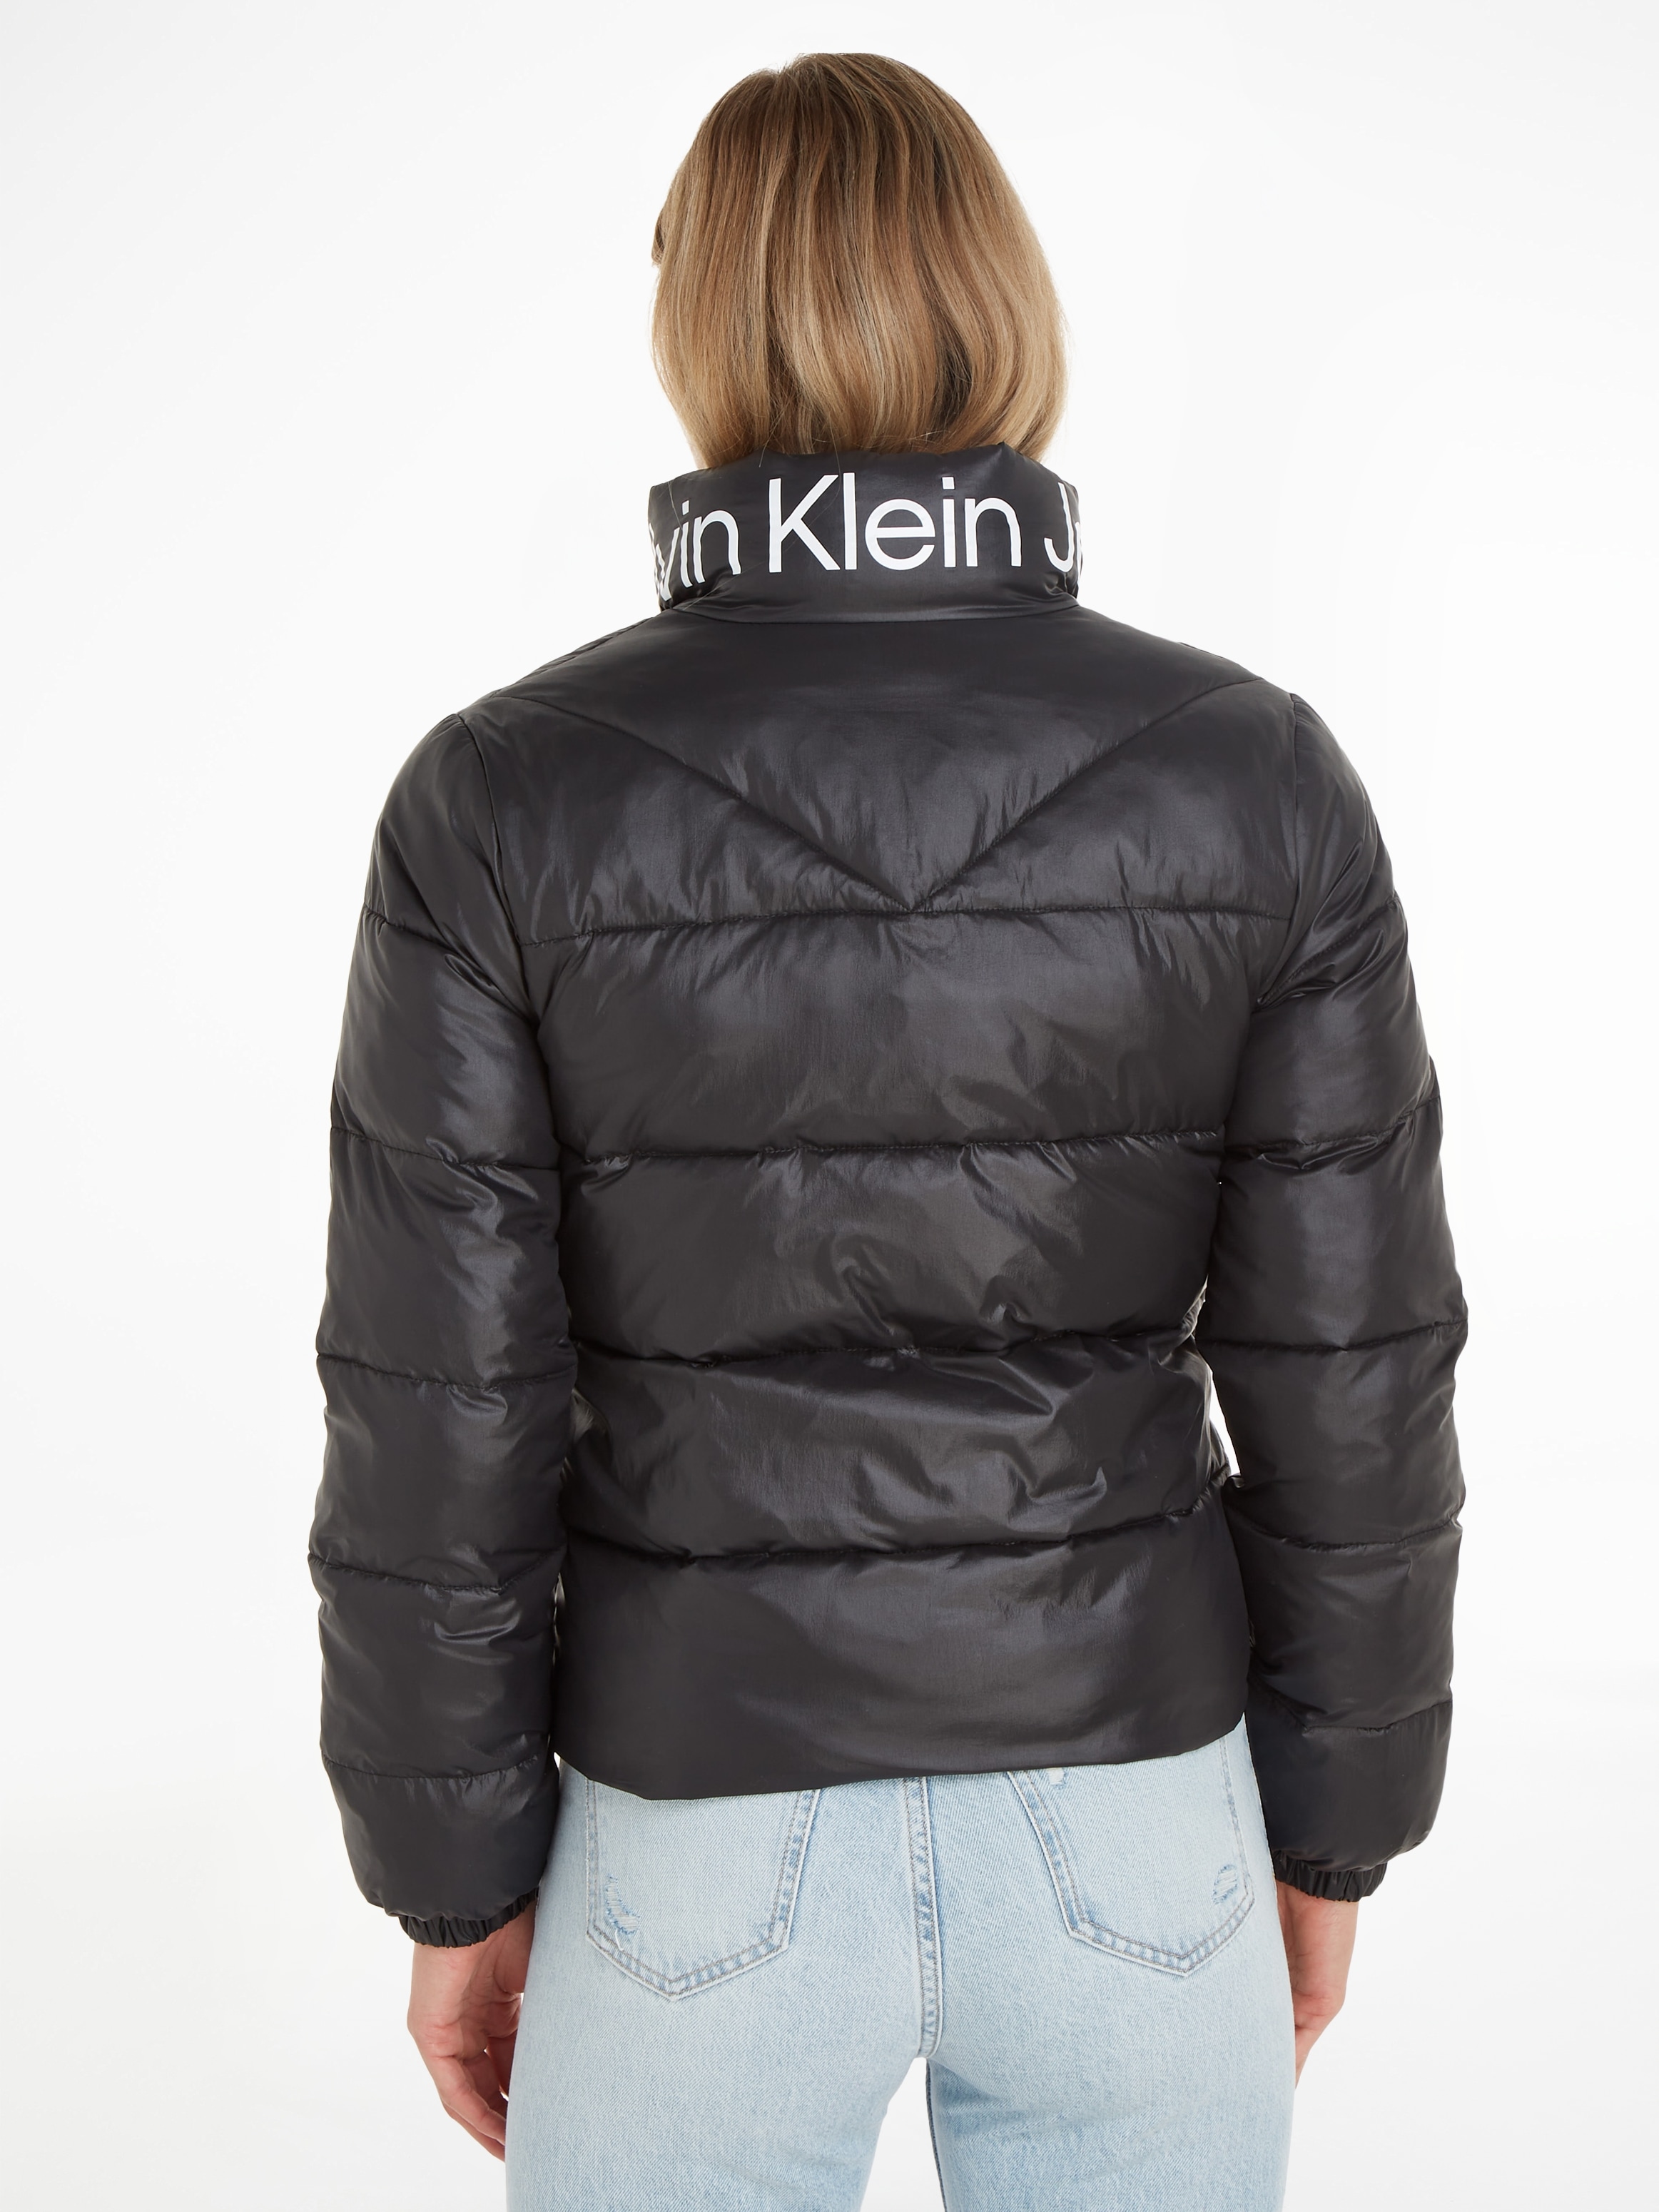 Calvin Klein PADDED im »FITTED JACKET« OTTO Jeans LW Steppjacke Shop Online